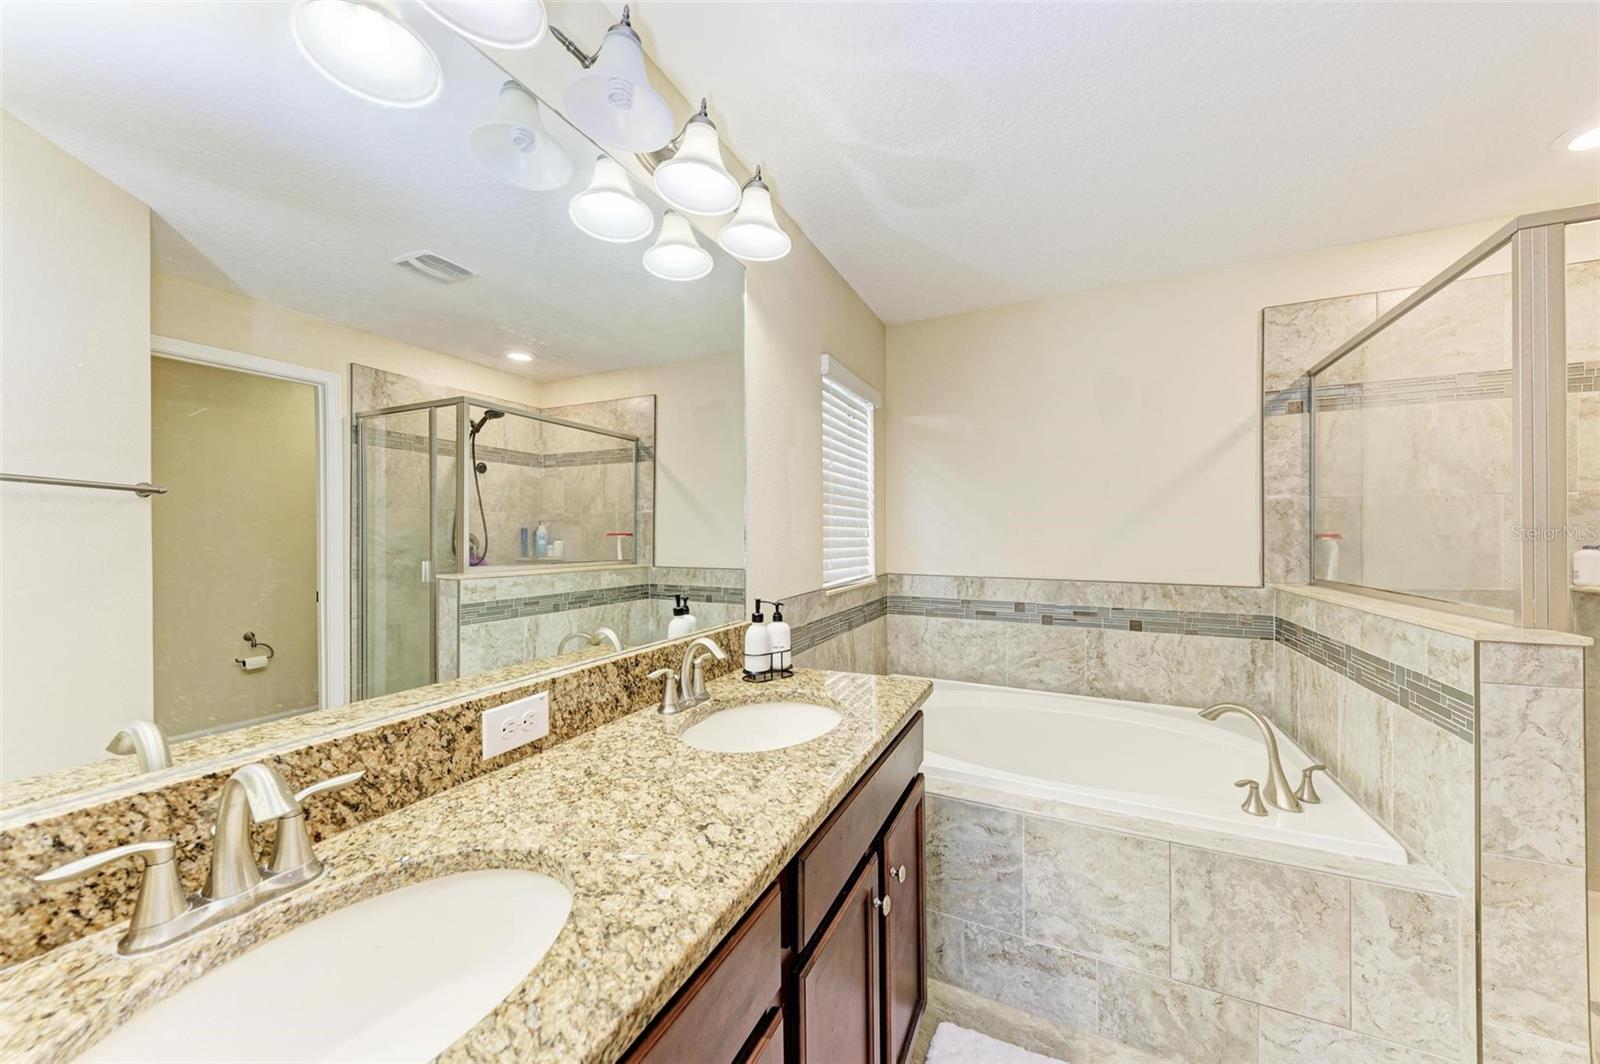 Primary bath with high end fixtures, granite, walk-in shower and soaking tub.  Look at those finishes!